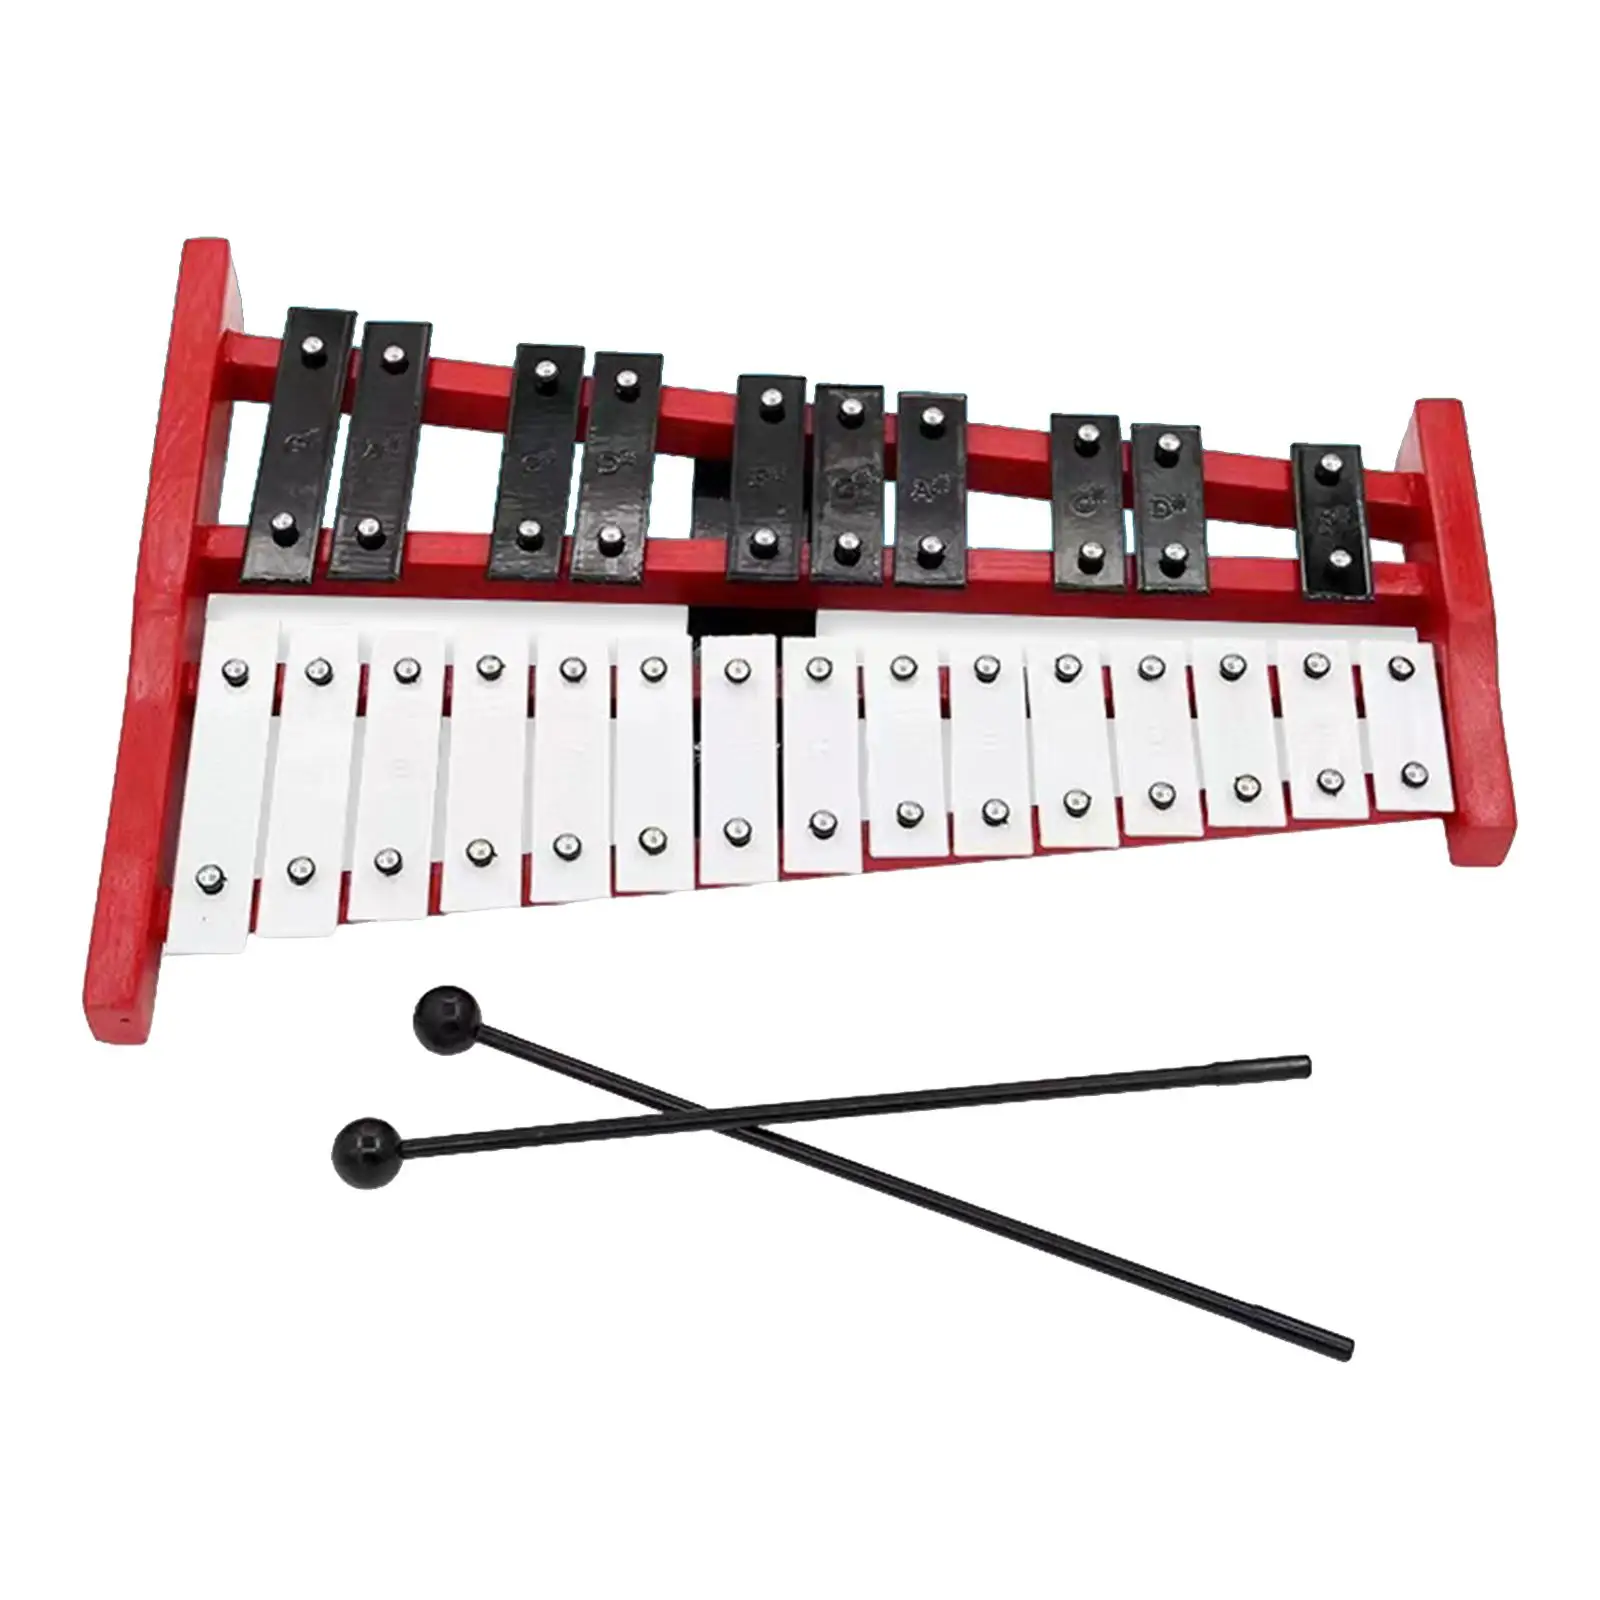 Glockenspiel Xylophone Kids Music Toy Hand Knock Piano Toy for Live Performance Concert School Orchestras Family Sessions